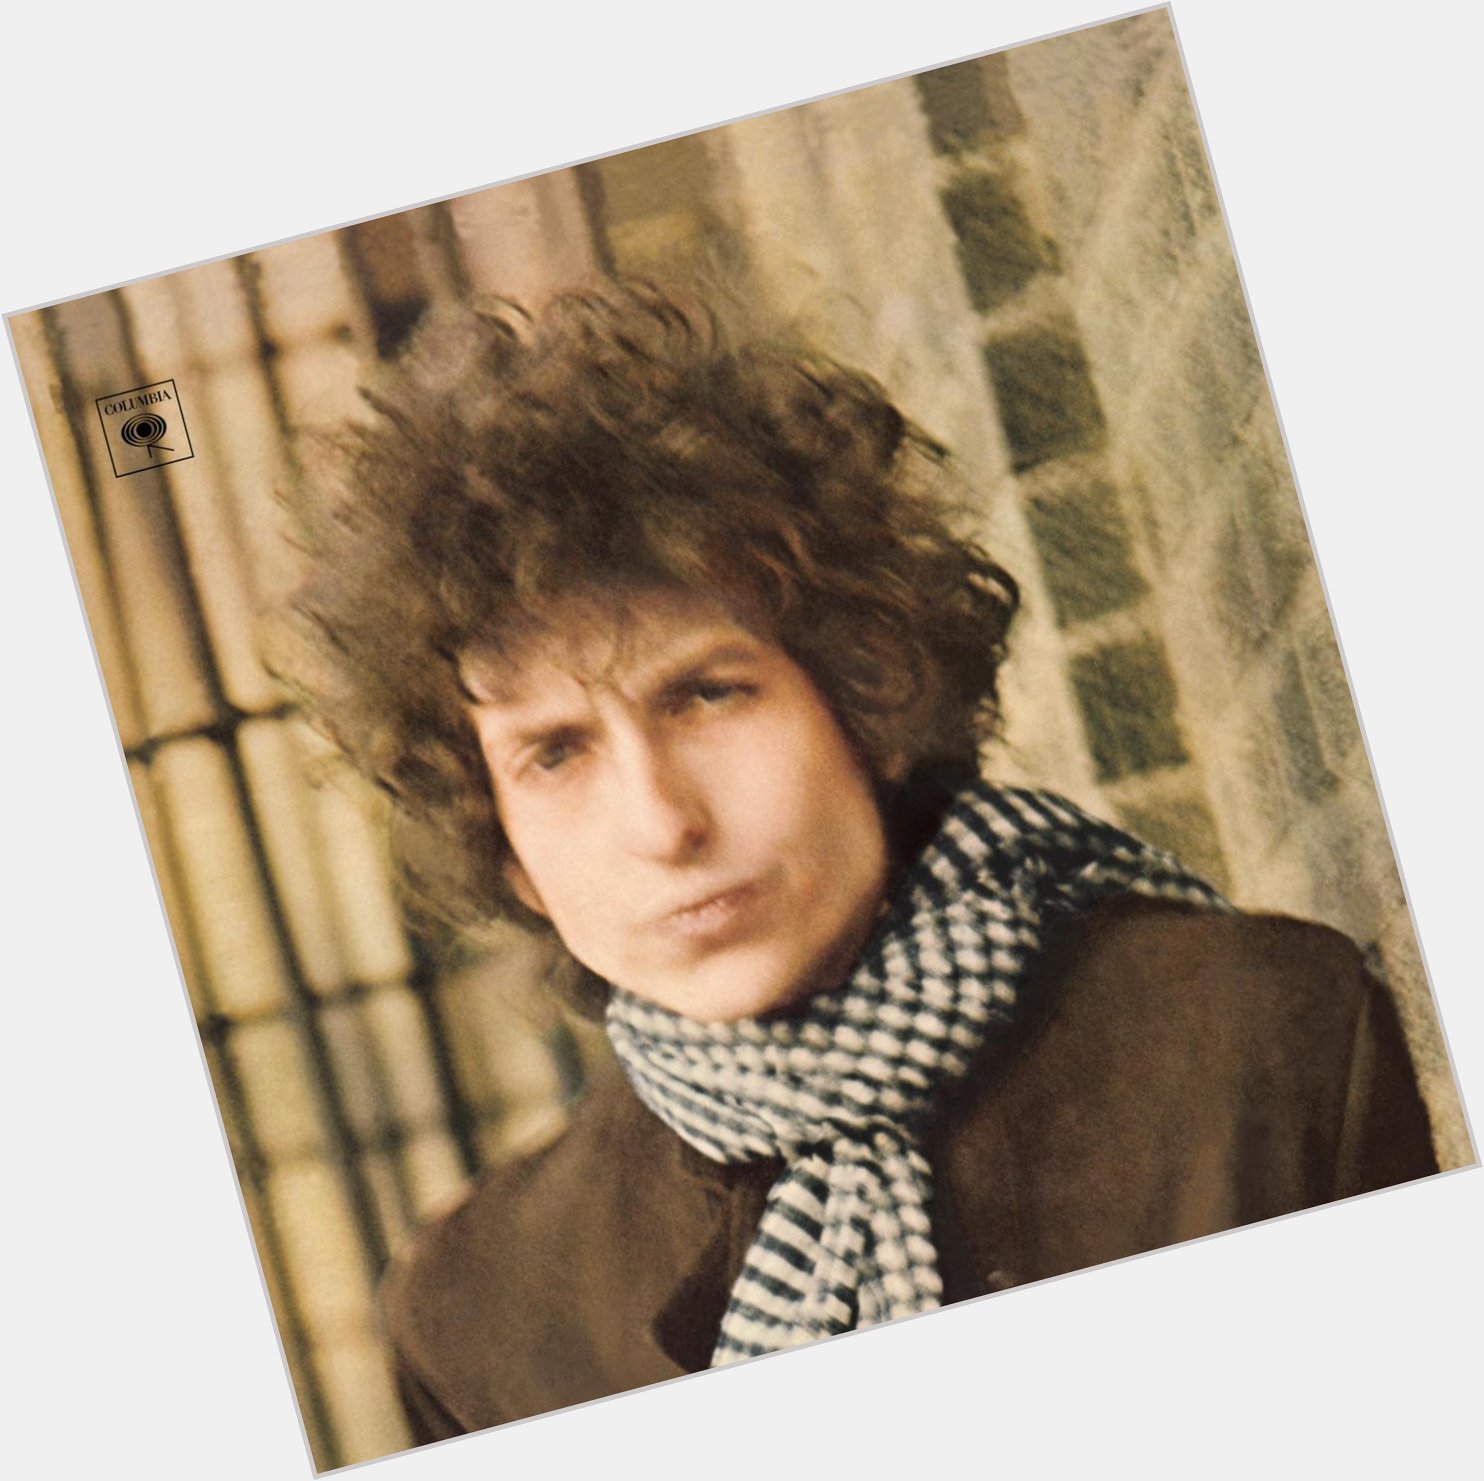 Happy birthday to Bob Dylan\s \Blonde on Blonde\, the most influential album of all time? 